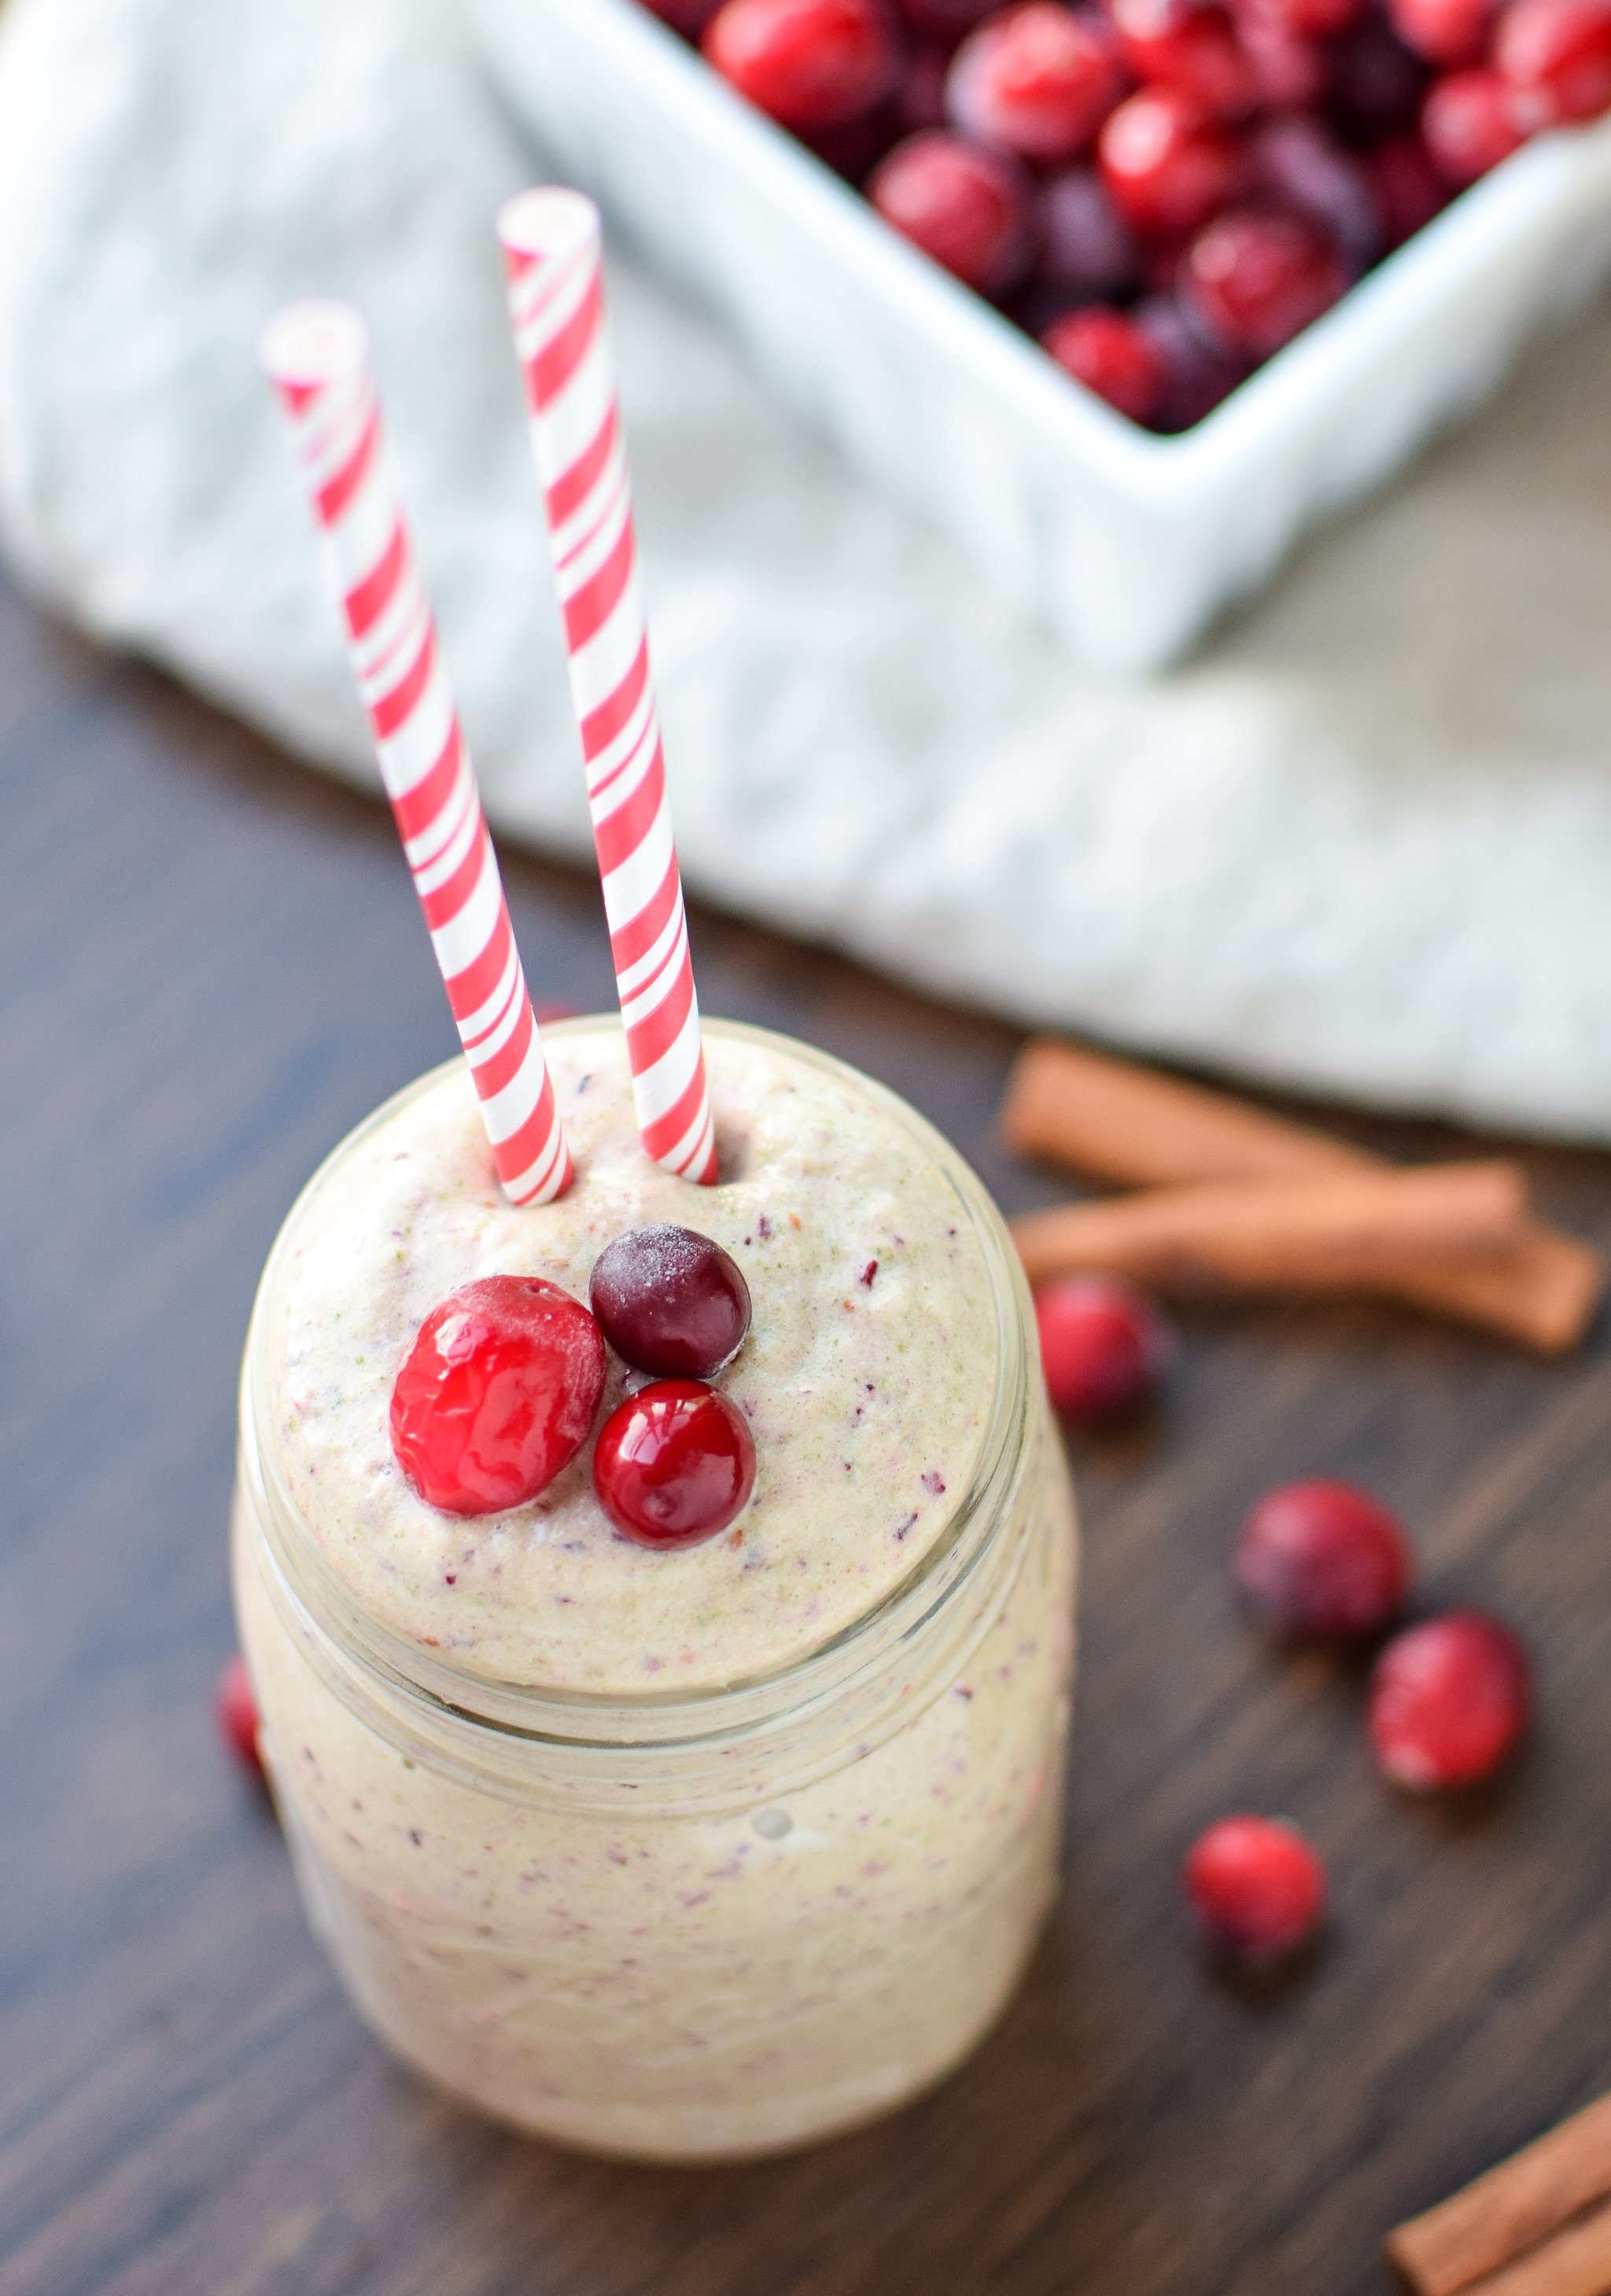 Orange Cranberry Greens Protein Smoothie recipe - You MUST try this new smoothie with happy Fall flavors - orange, cranberry, and CINNAMON make this creamy breakfast (or lunch!) complete! - ProjectMealPlan.com